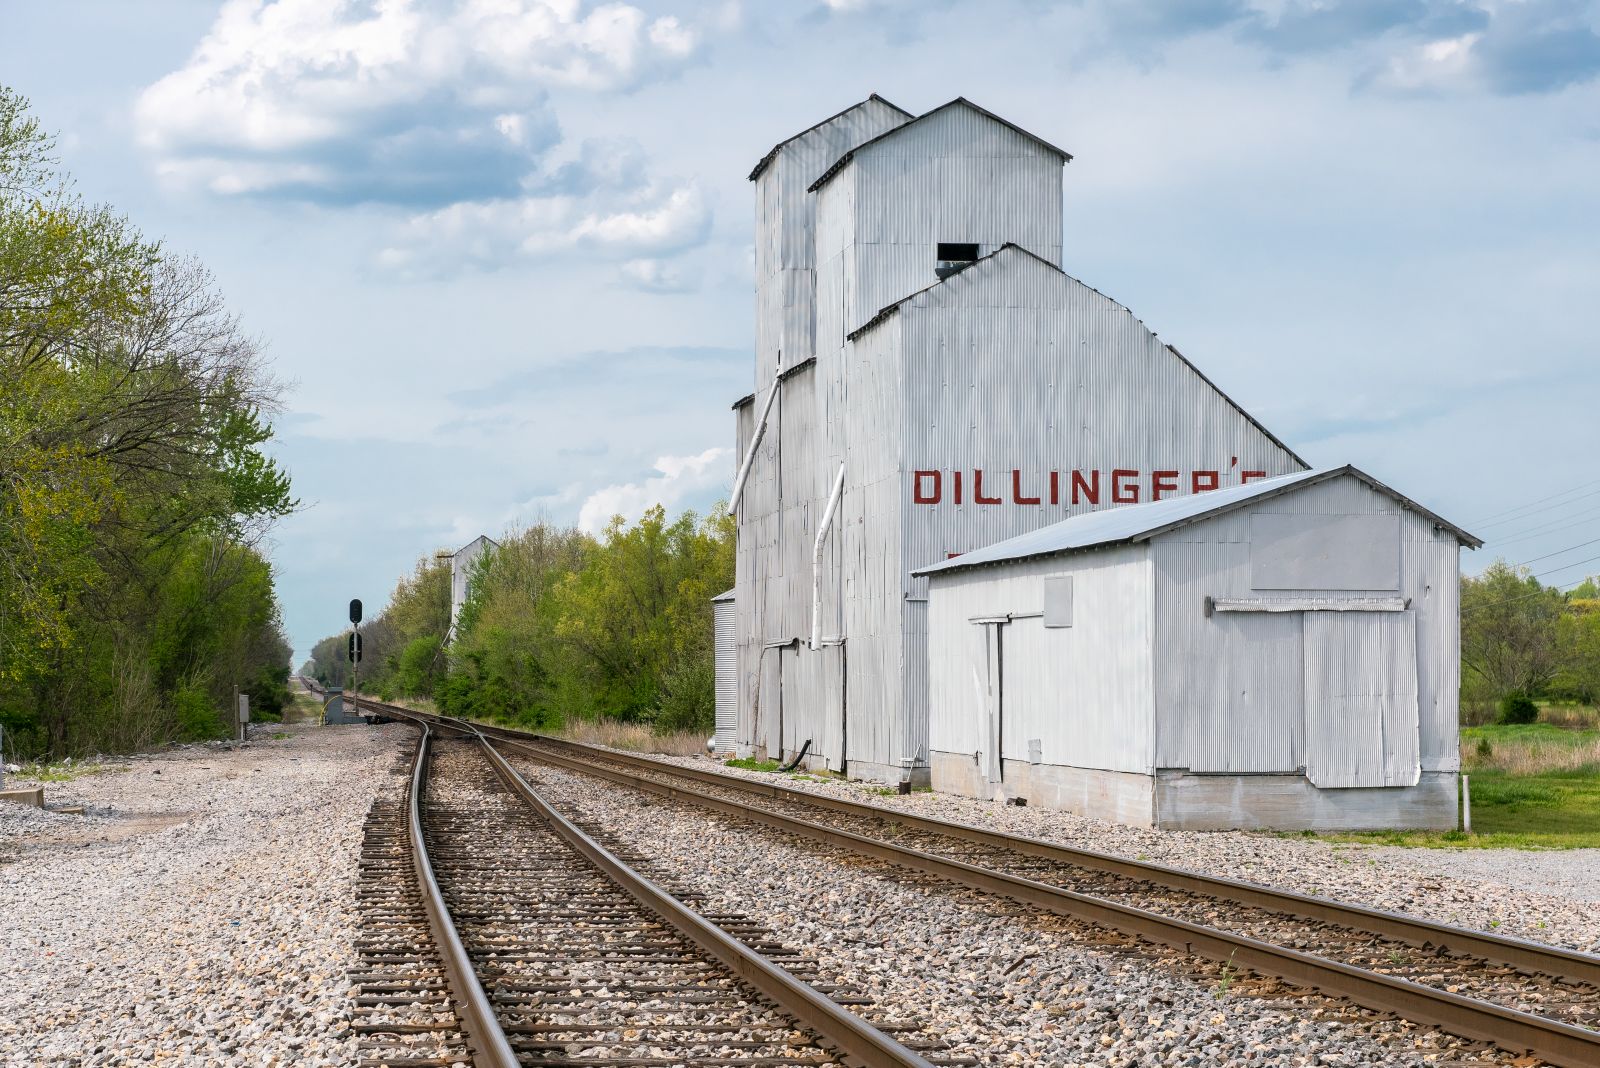 Dillinger's Classic Midwest